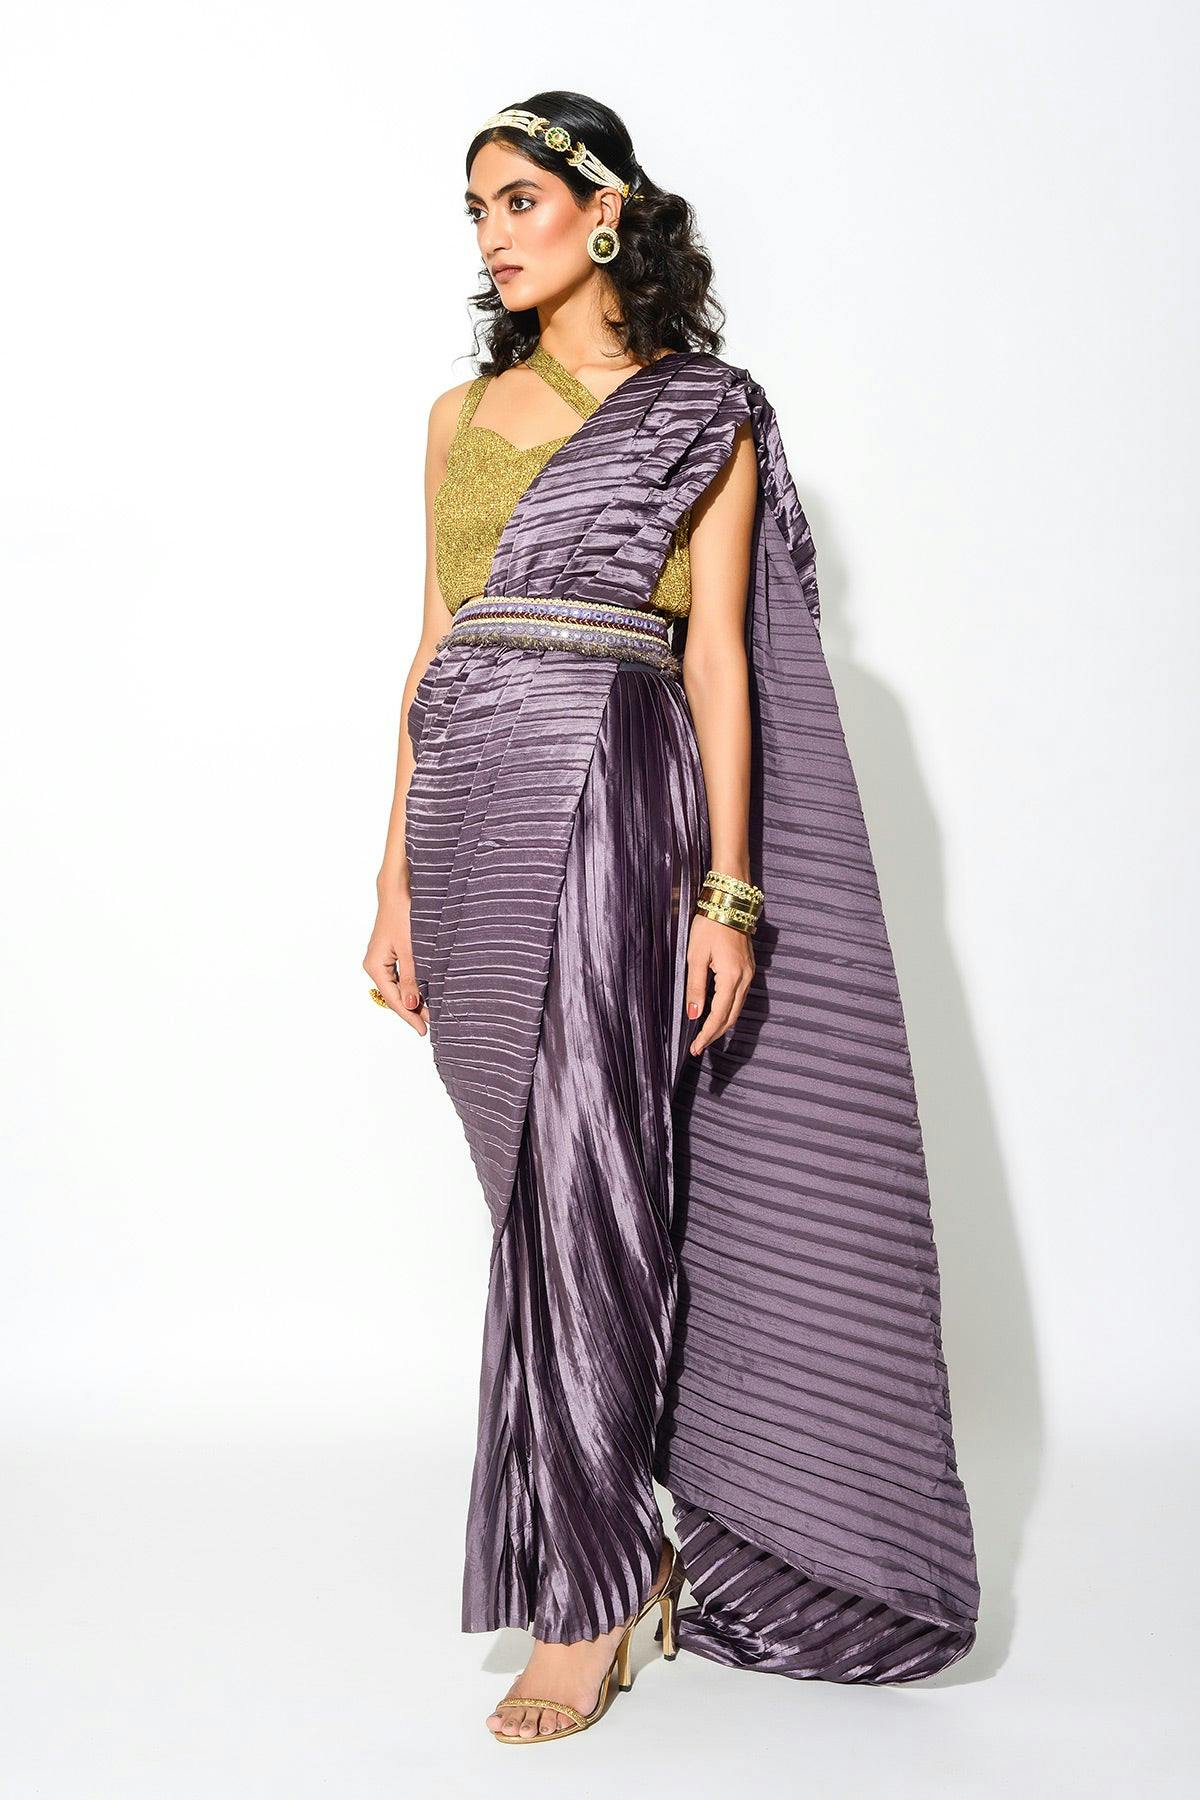 Thumbnail preview #2 for RV Signature Belt Saree